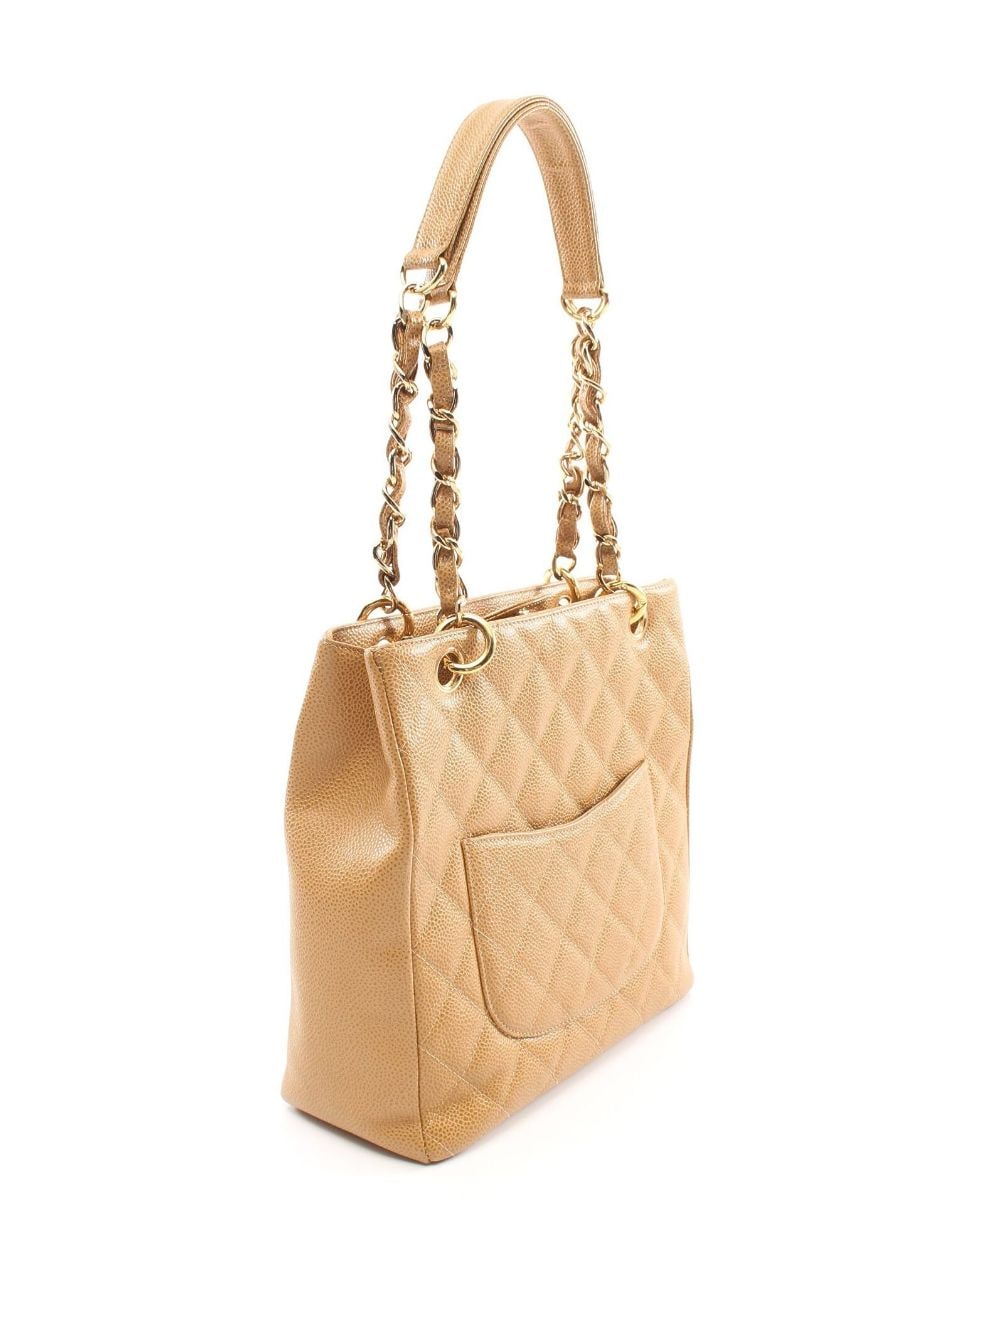 CHANEL Pre-Owned 2003-2004 pre-owned Petite shopper - Beige